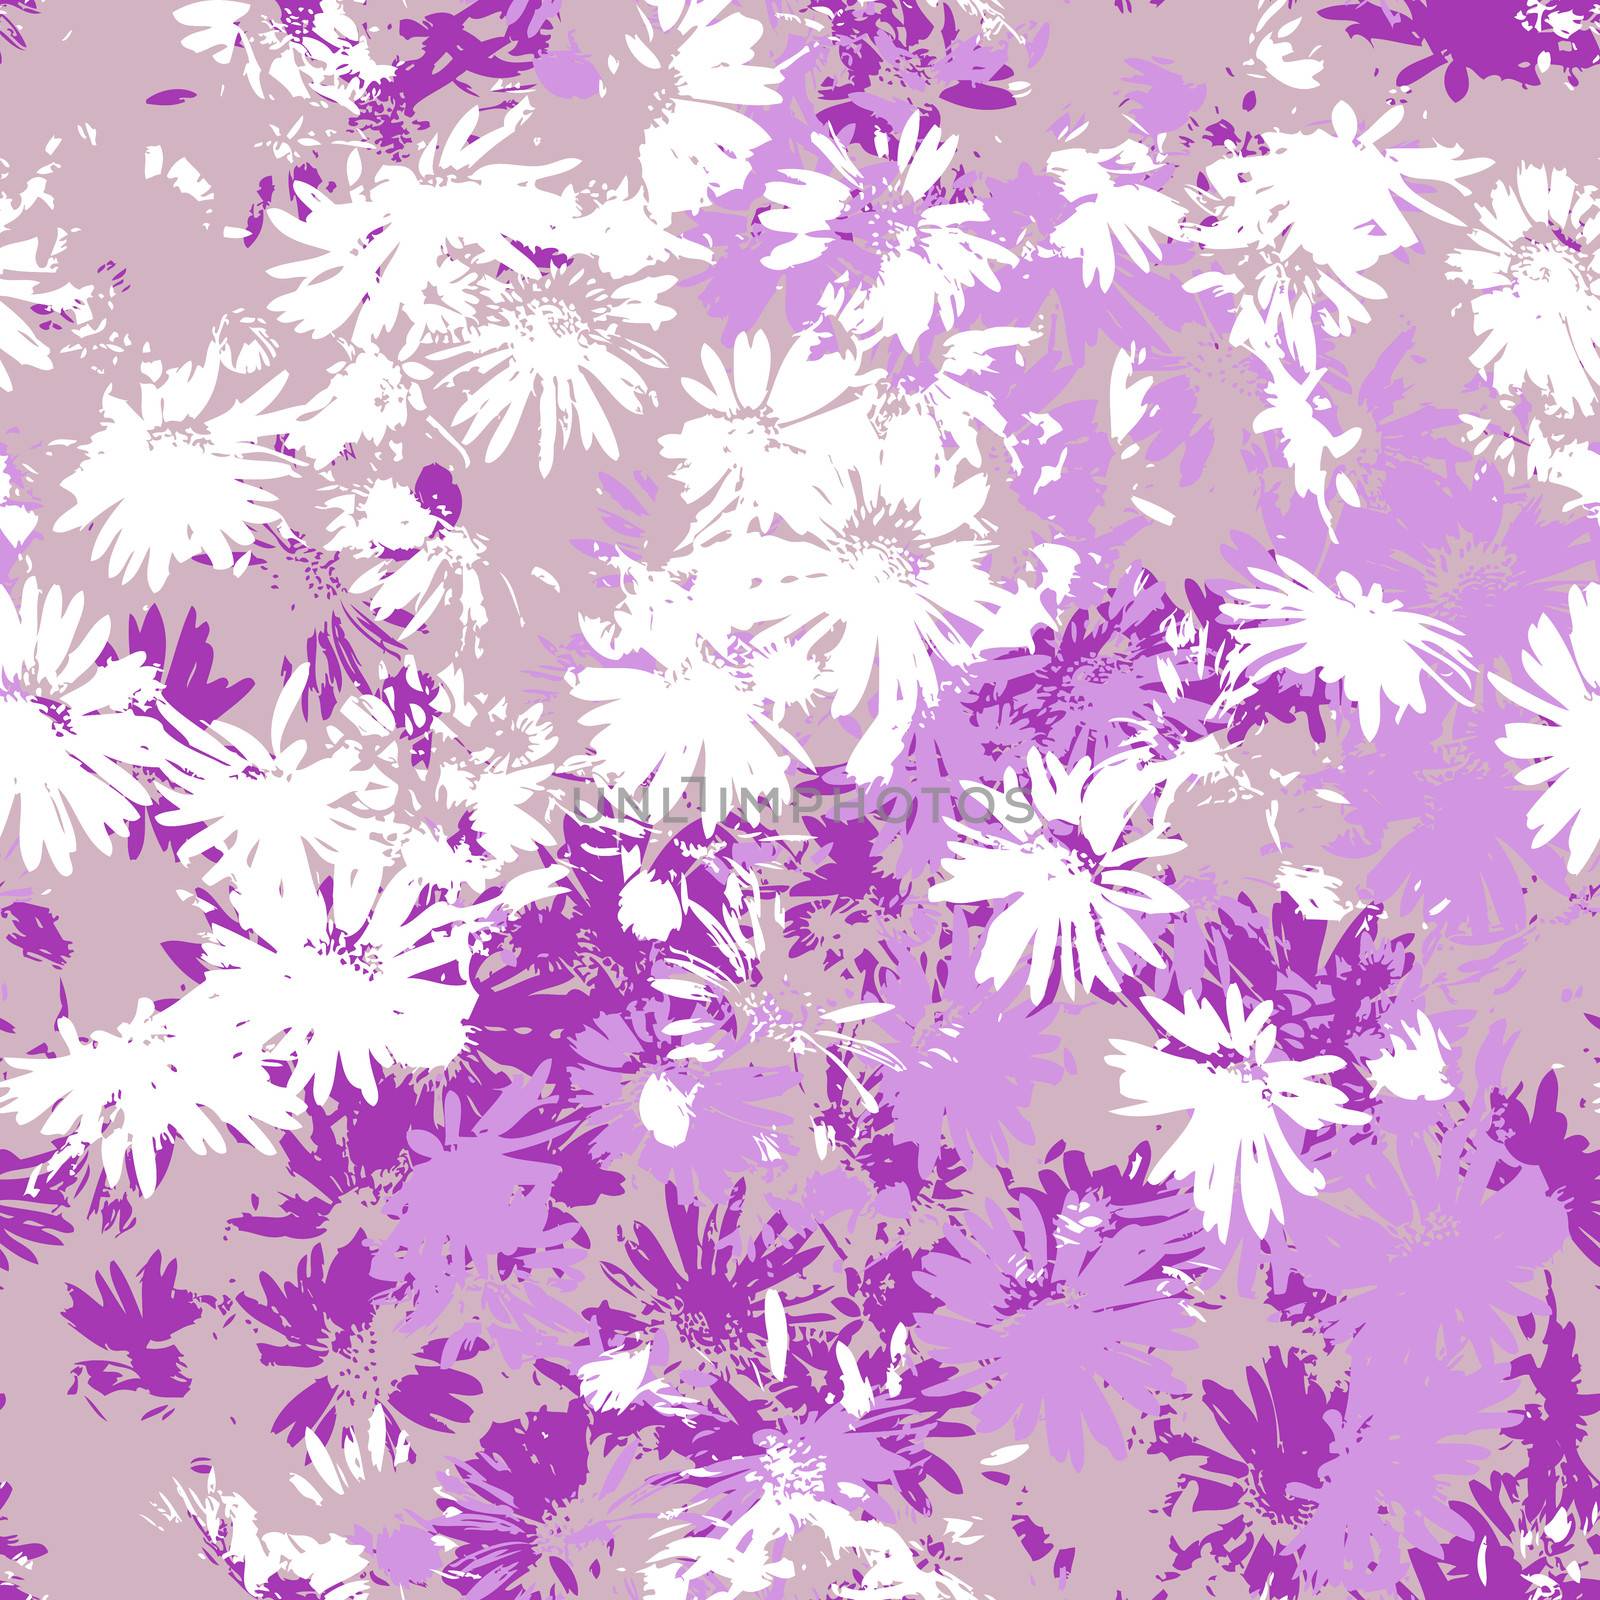 Seamless texture with flowers